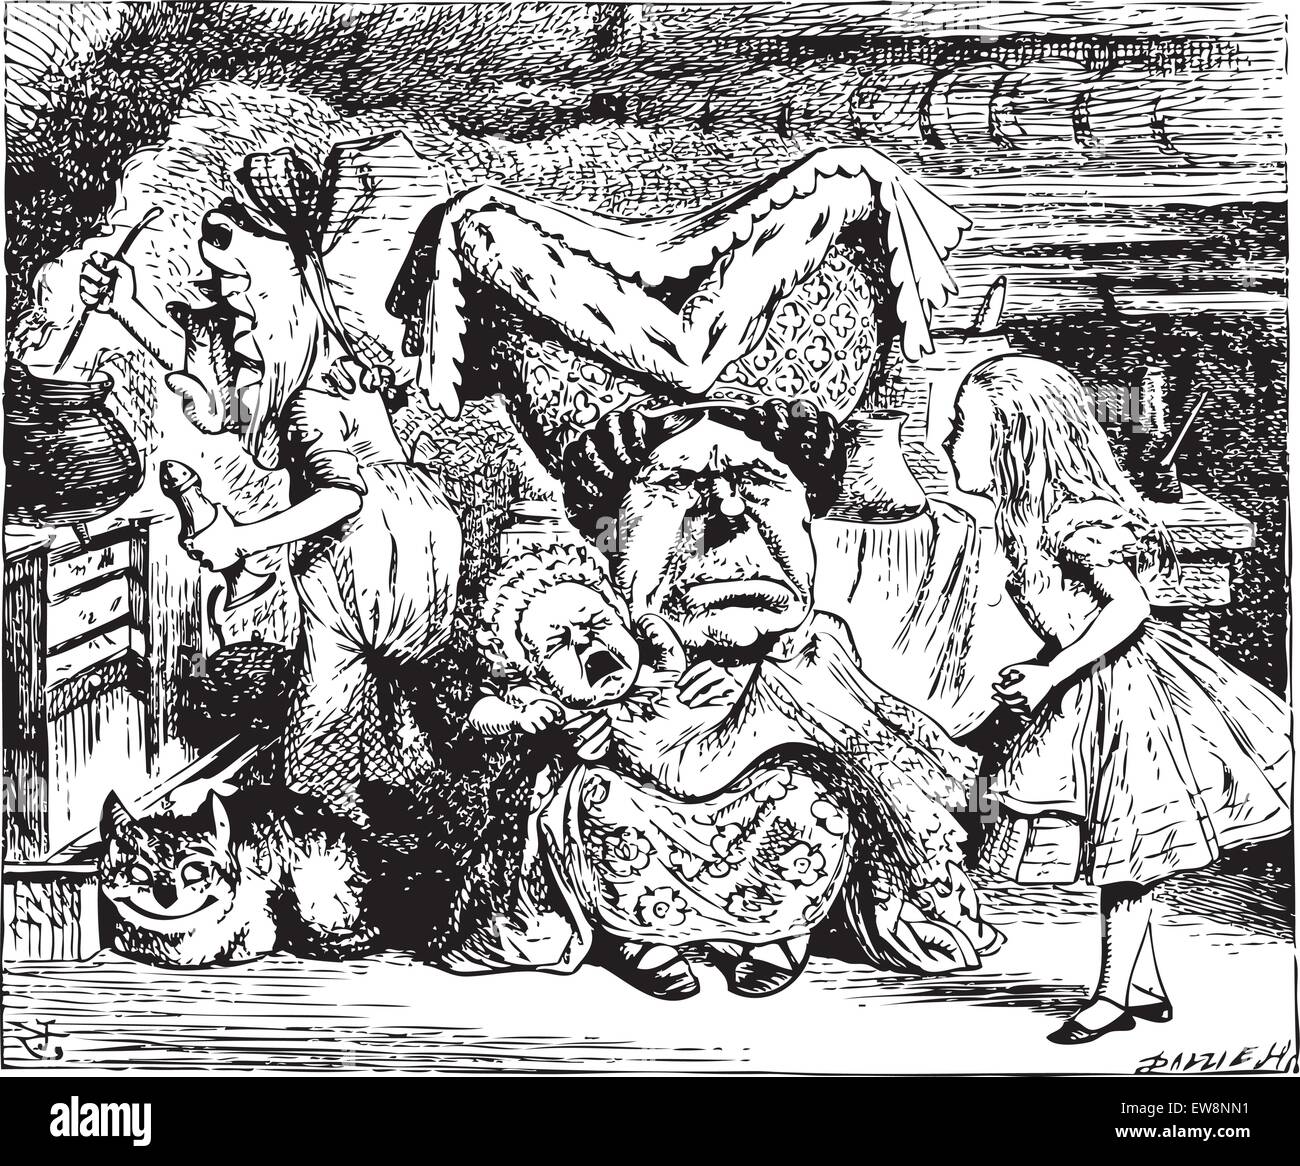 Alice in Wonderland.Cook, Duchess, Cheshire Cat, Baby, and Alice. Duchess is sitting on a three-legged stool in the middle, nursing a baby. Alice's Adventures in Wonderland. Illustration from John Tenniel, published in 1865. Stock Vector